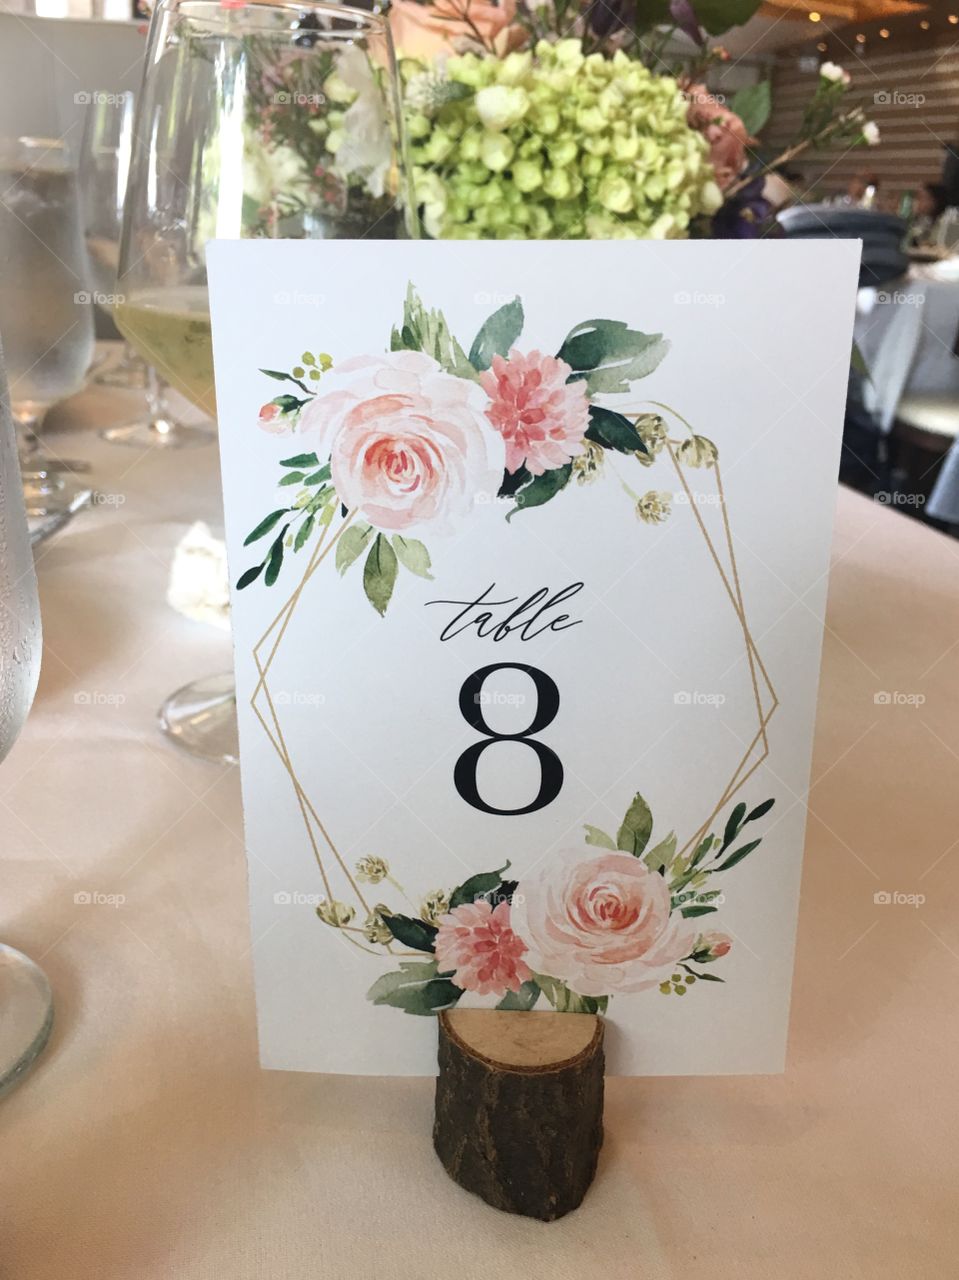 Floral table number card at event